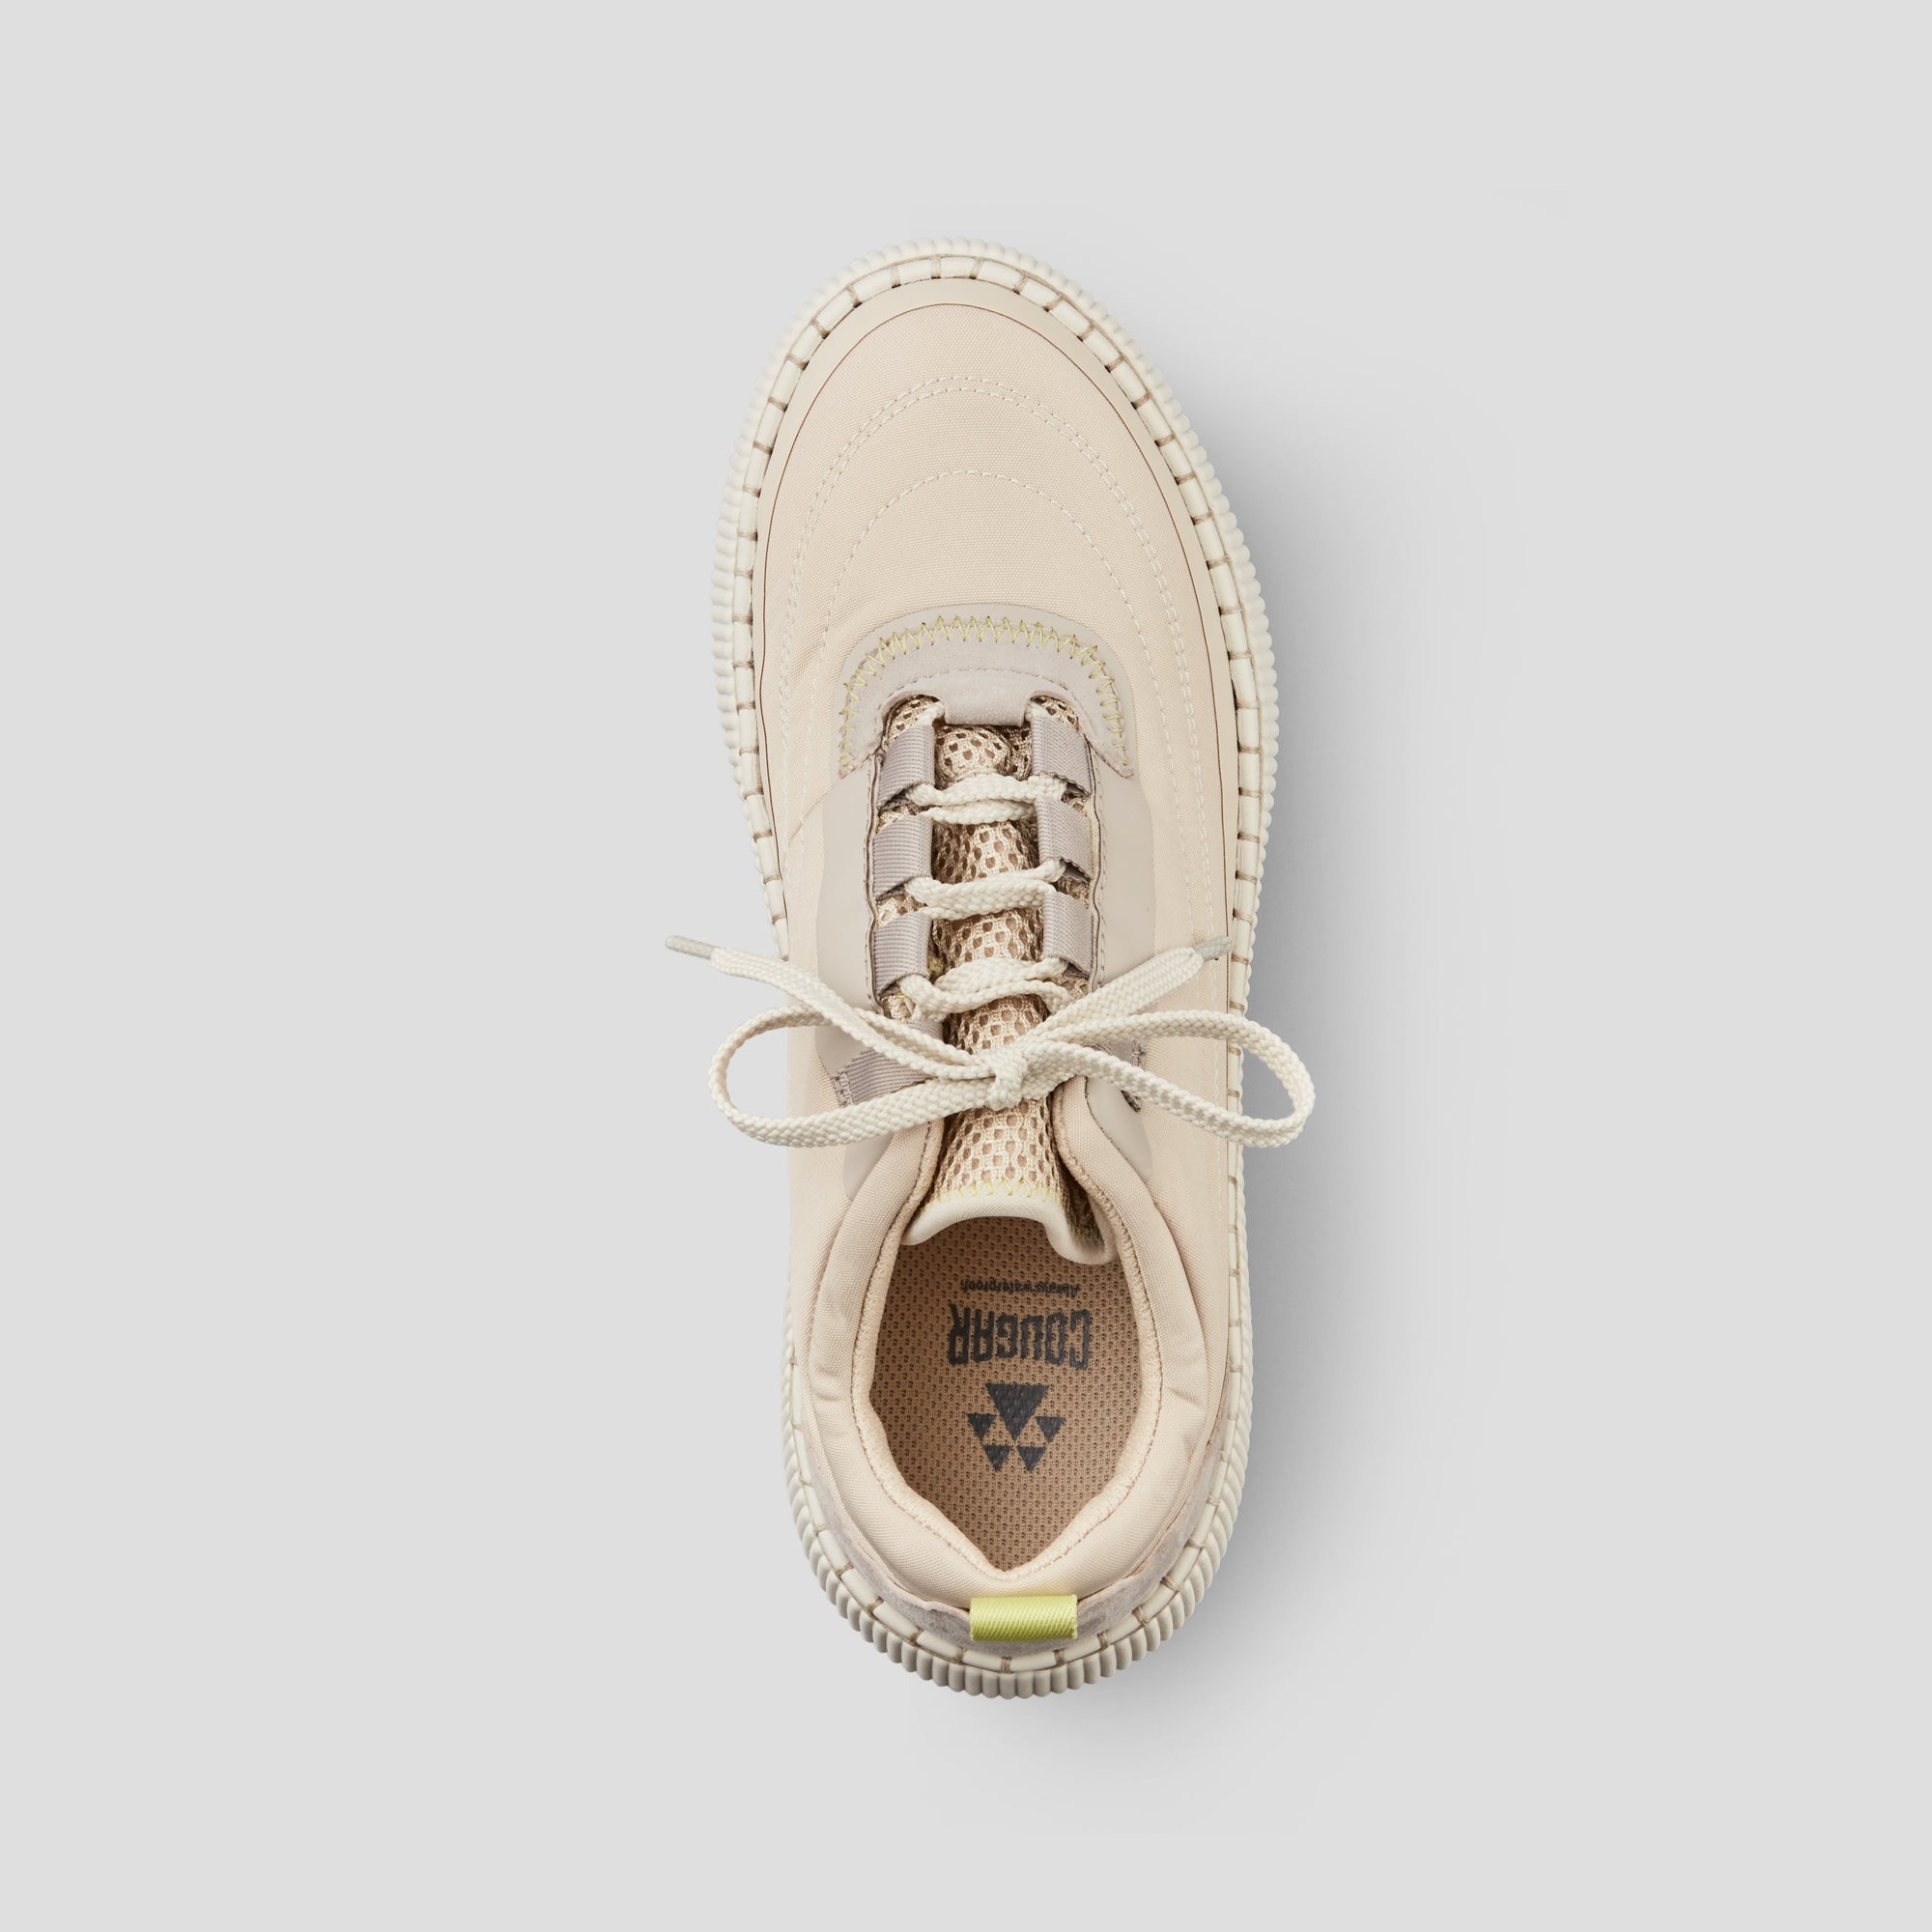 Sayah Luxmotion Nylon and Suede Waterproof Sneaker - Color Oyster-Taupe